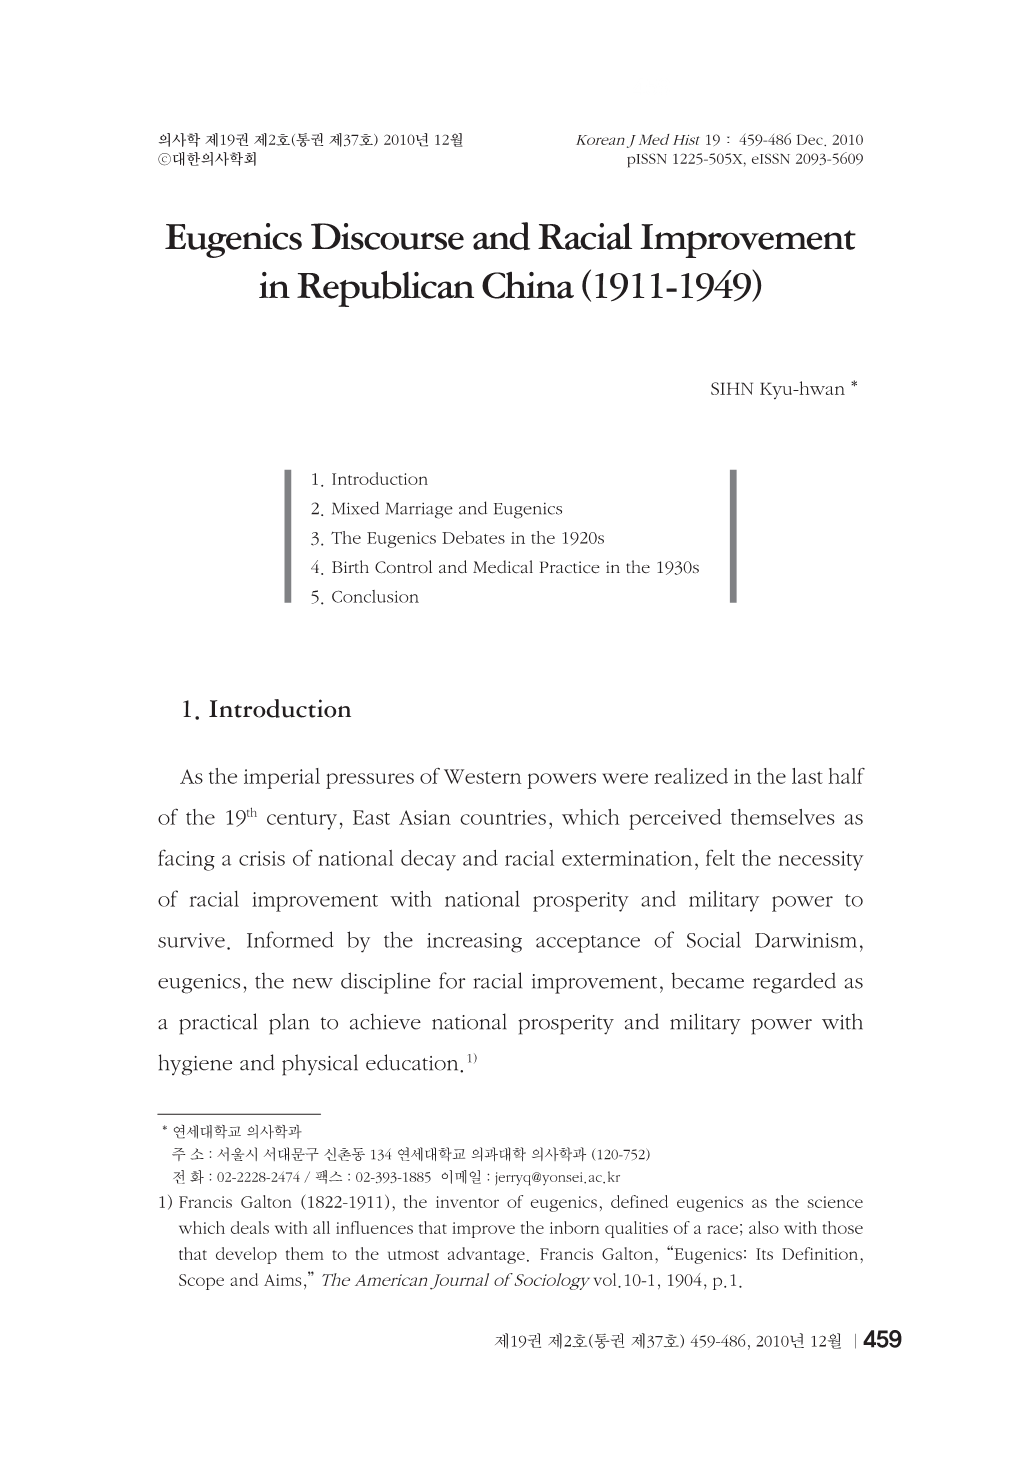 Eugenics Discourse and Racial Improvement in Republican China (1911-1949)